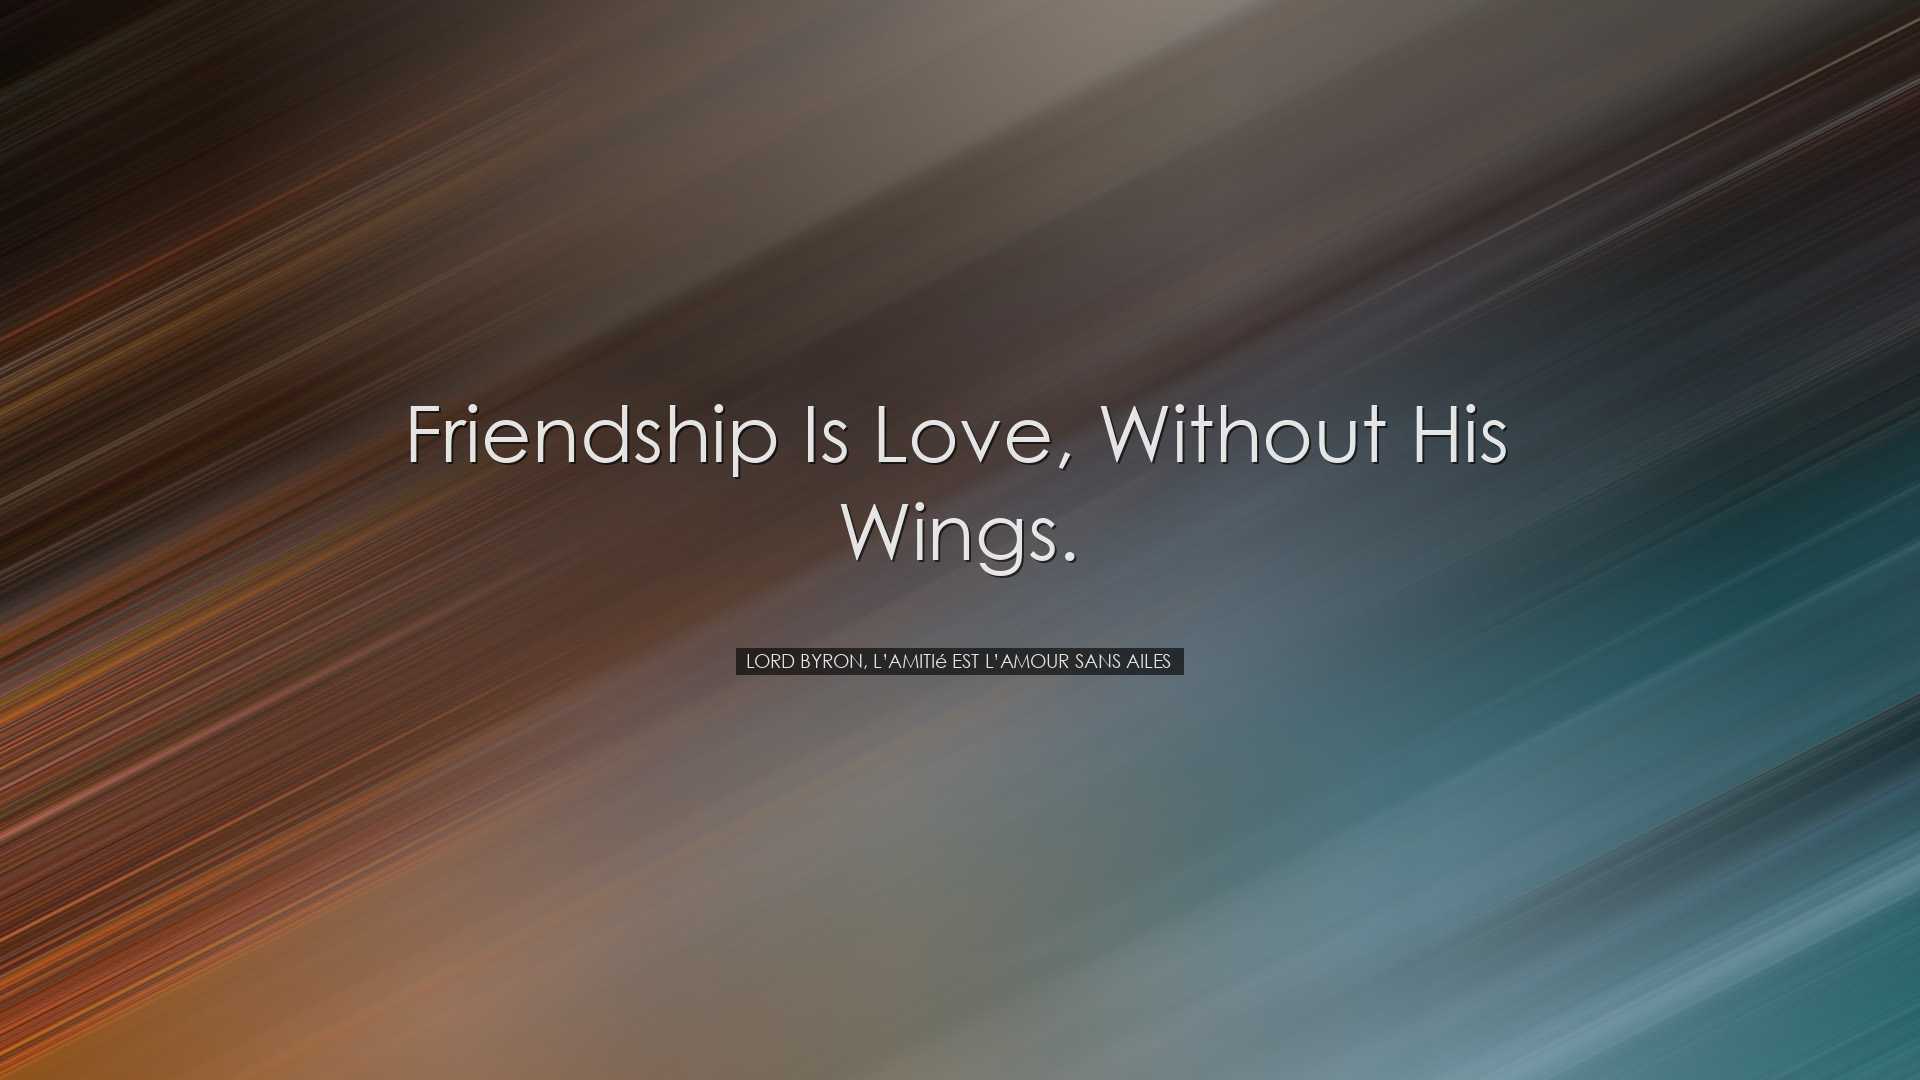 Friendship is Love, without his wings. - Lord Byron, L’Amiti